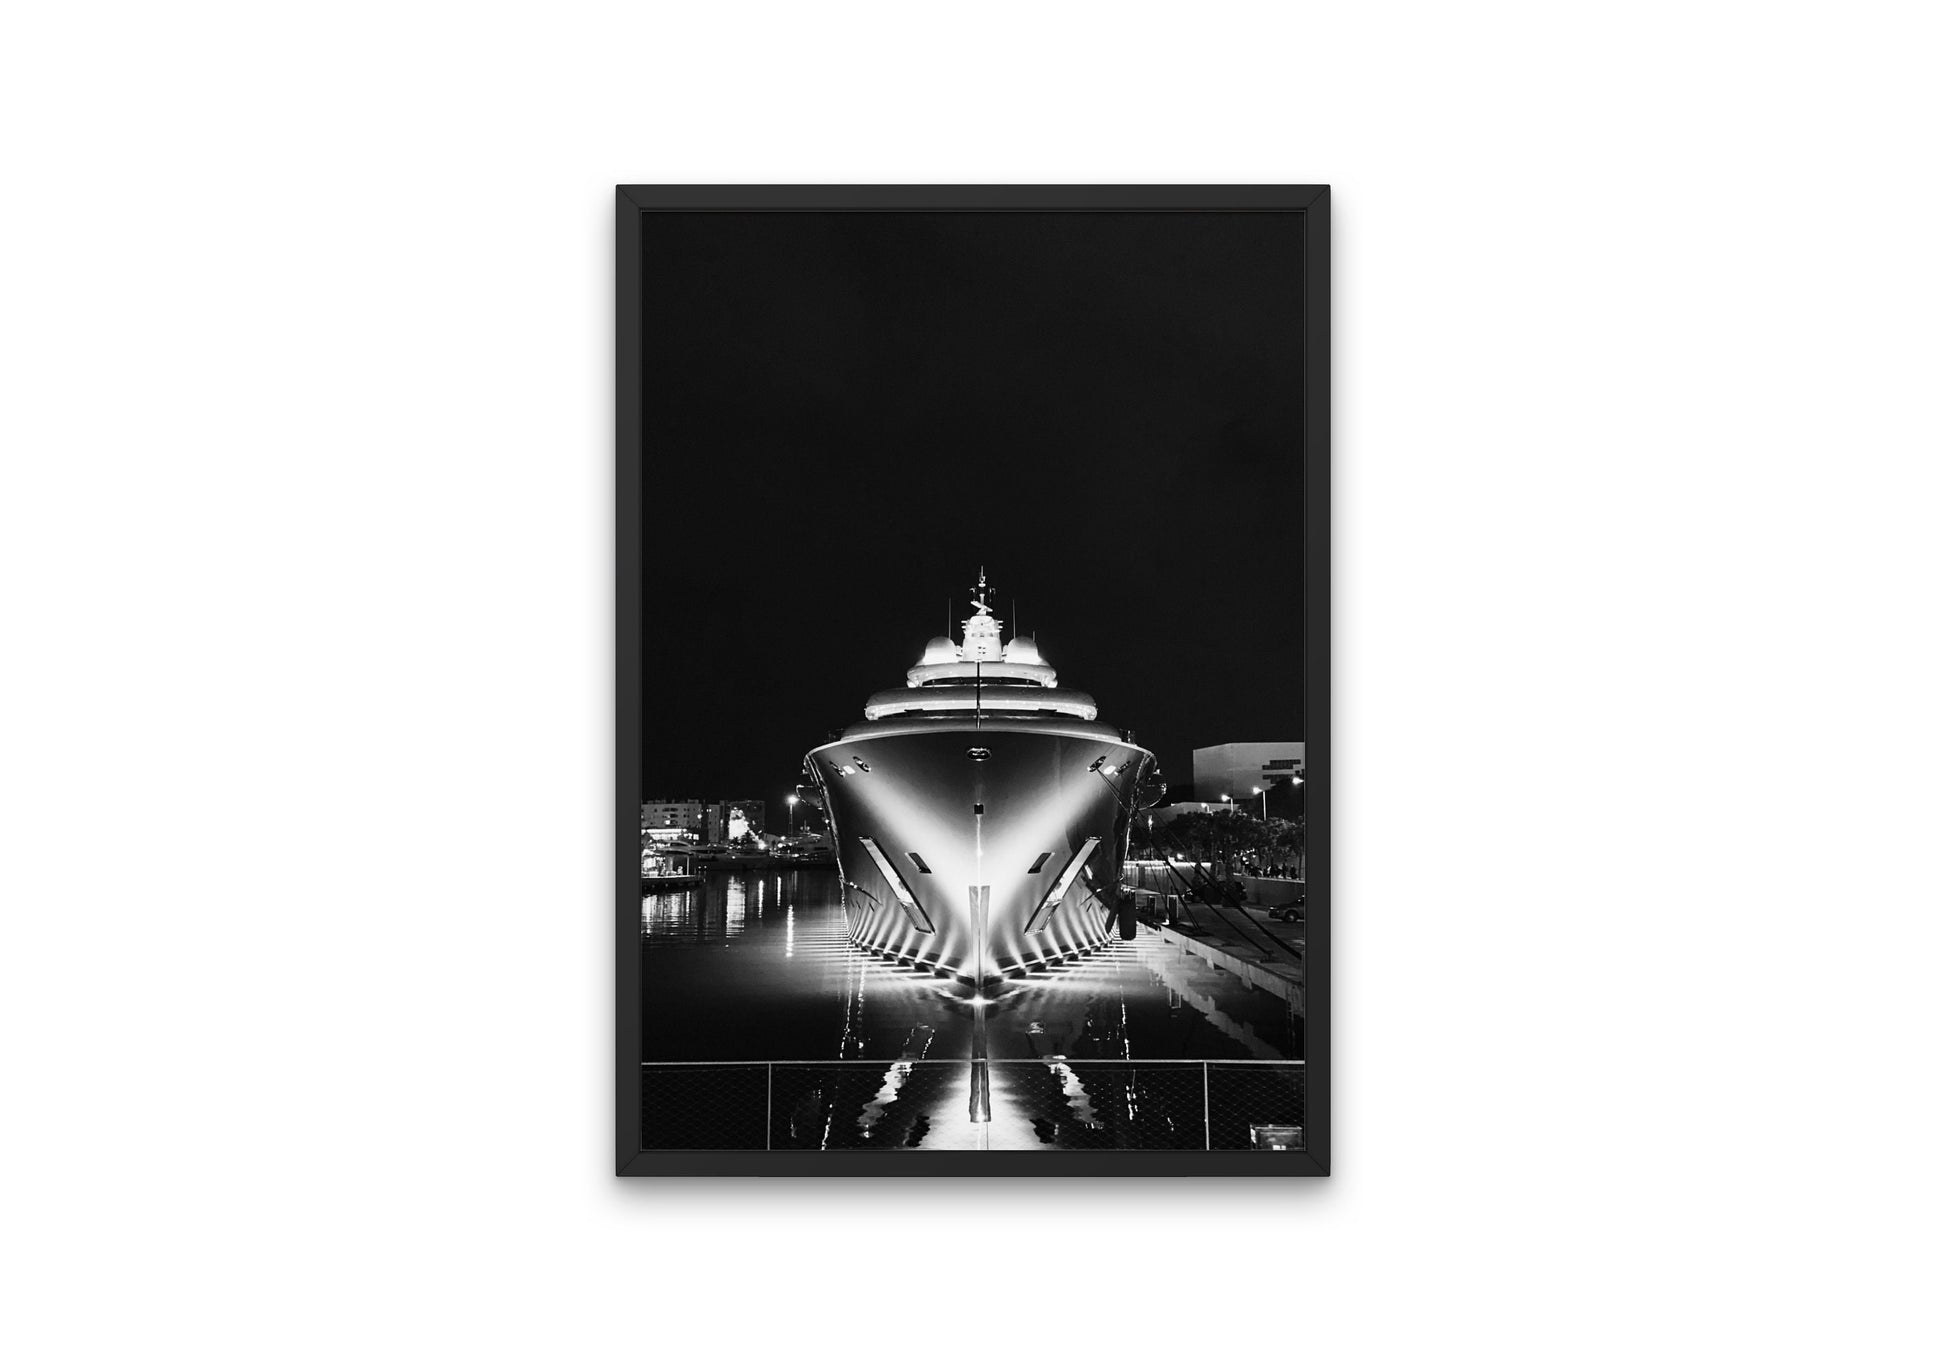 Black & White Yacht Poster INSTANT DOWNLOAD, luxury fashion poster, sailing poster, Success poster, Monte Carlo poster, luxury aesthetic